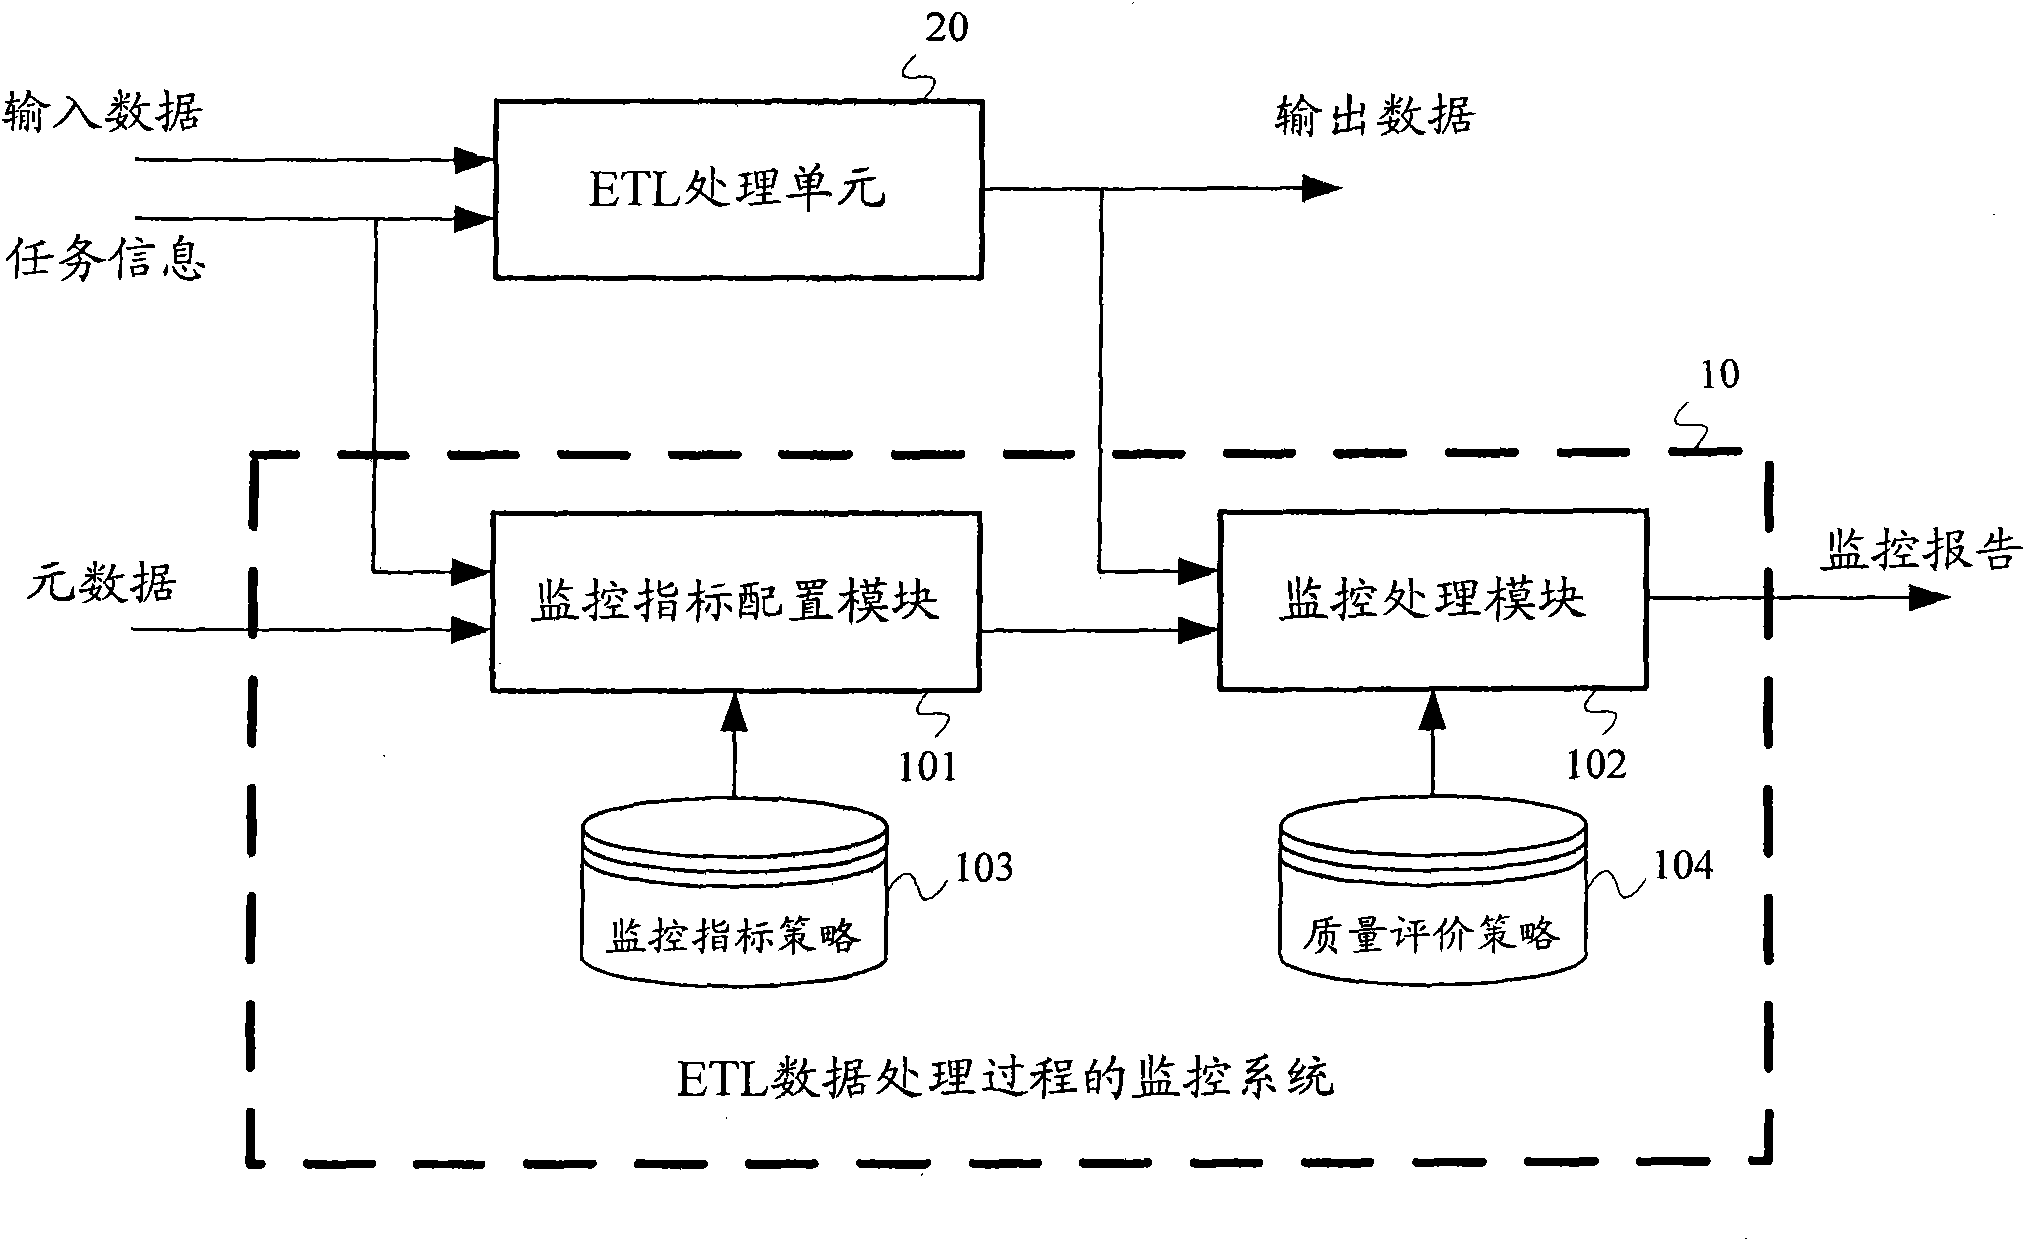 Method and system for monitoring ETL (extract-transform-load) data processing process